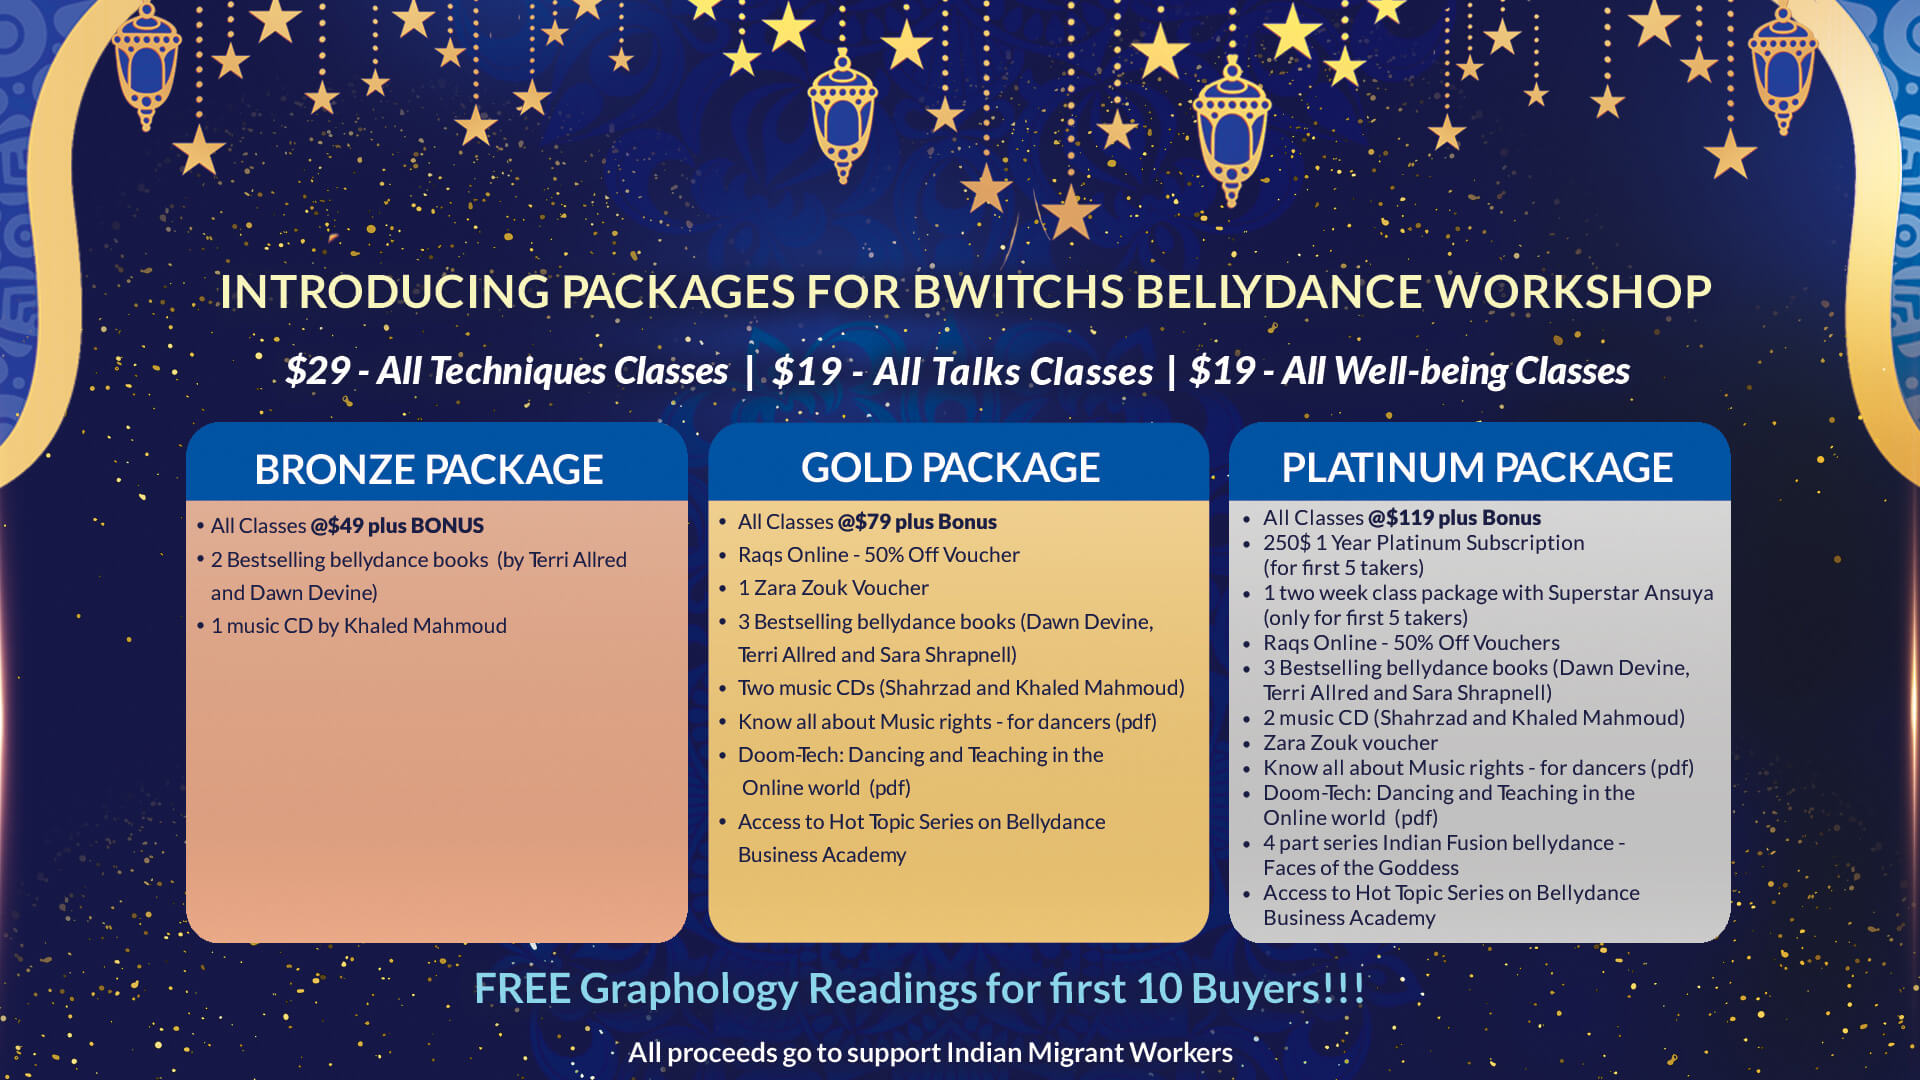 Packages for Bwitches Bellydance Workshop